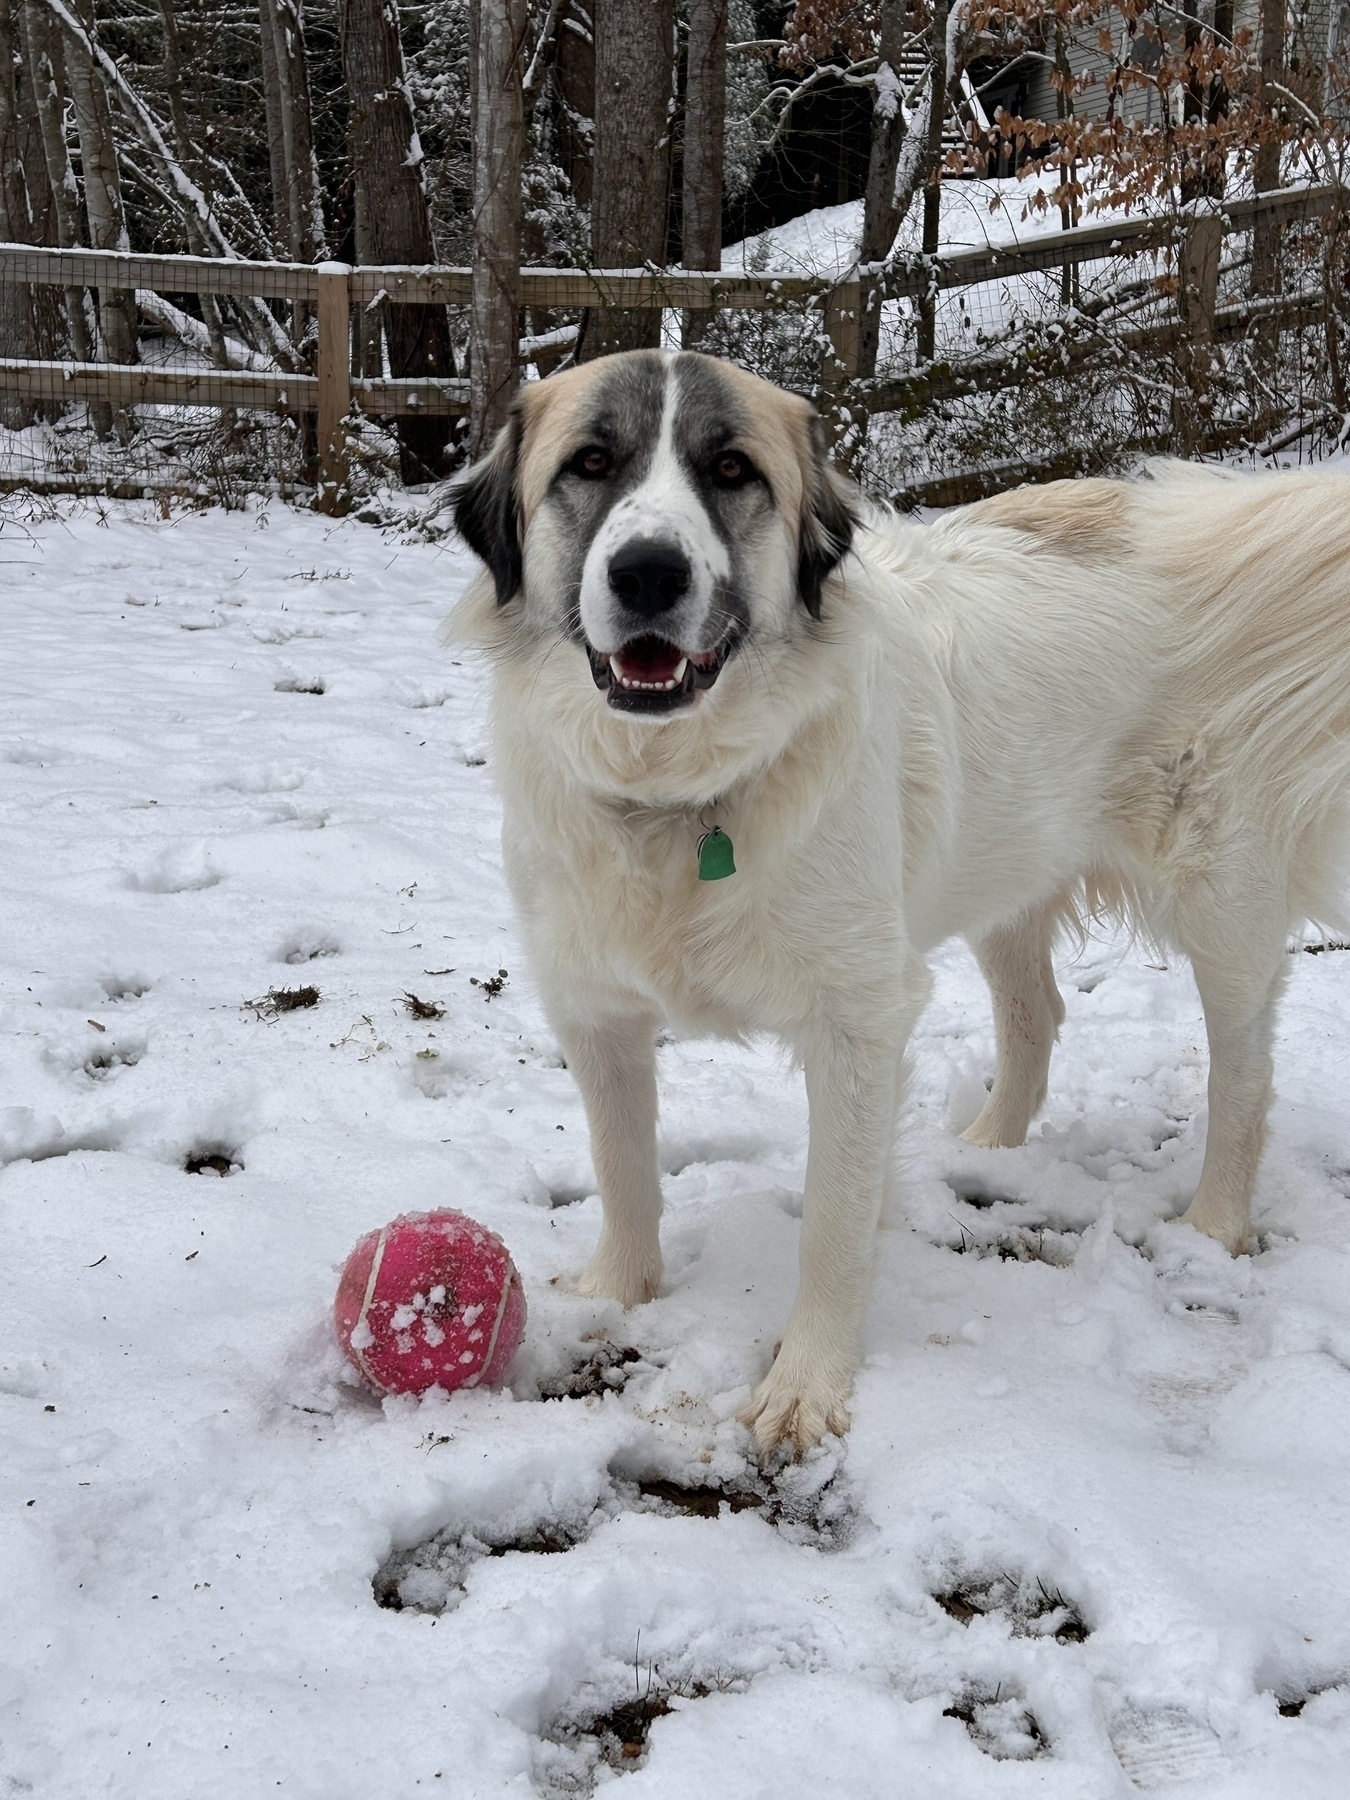 Picture of our pup Gracie standing in the snow next to her pink ball.